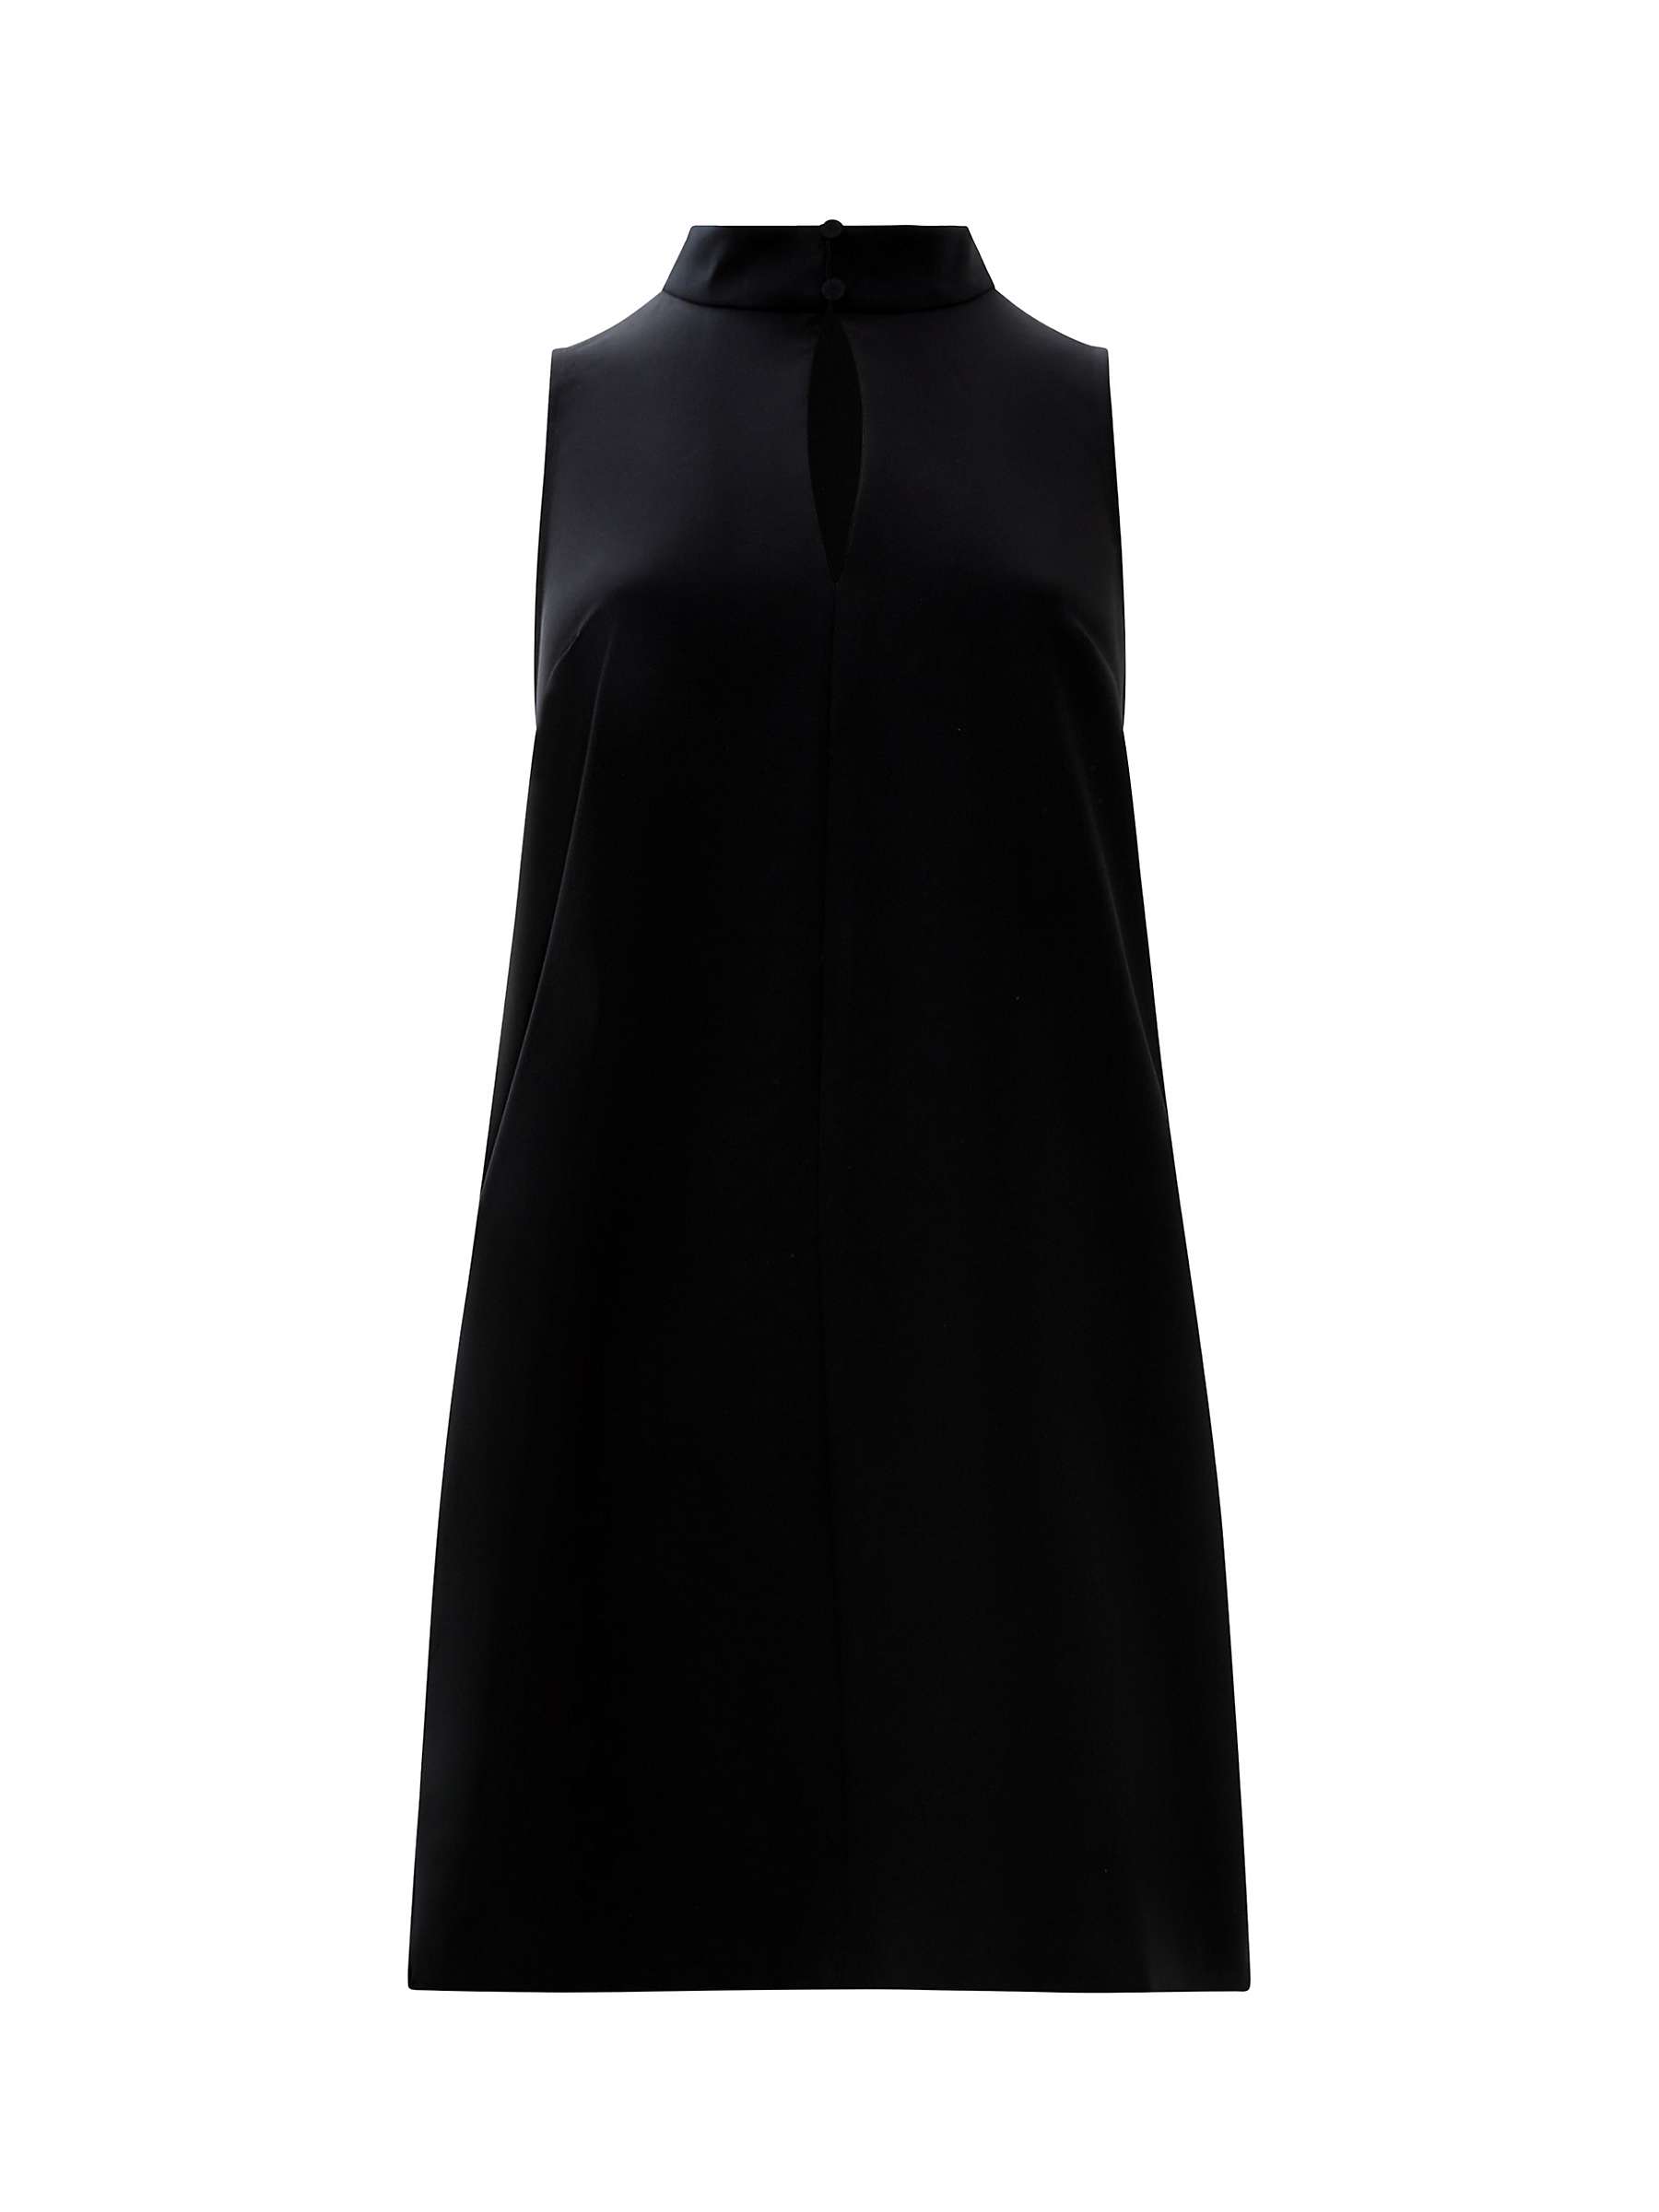 Buy French Connection Echo Sleeveless Keyhole Dress, Blackout Online at johnlewis.com